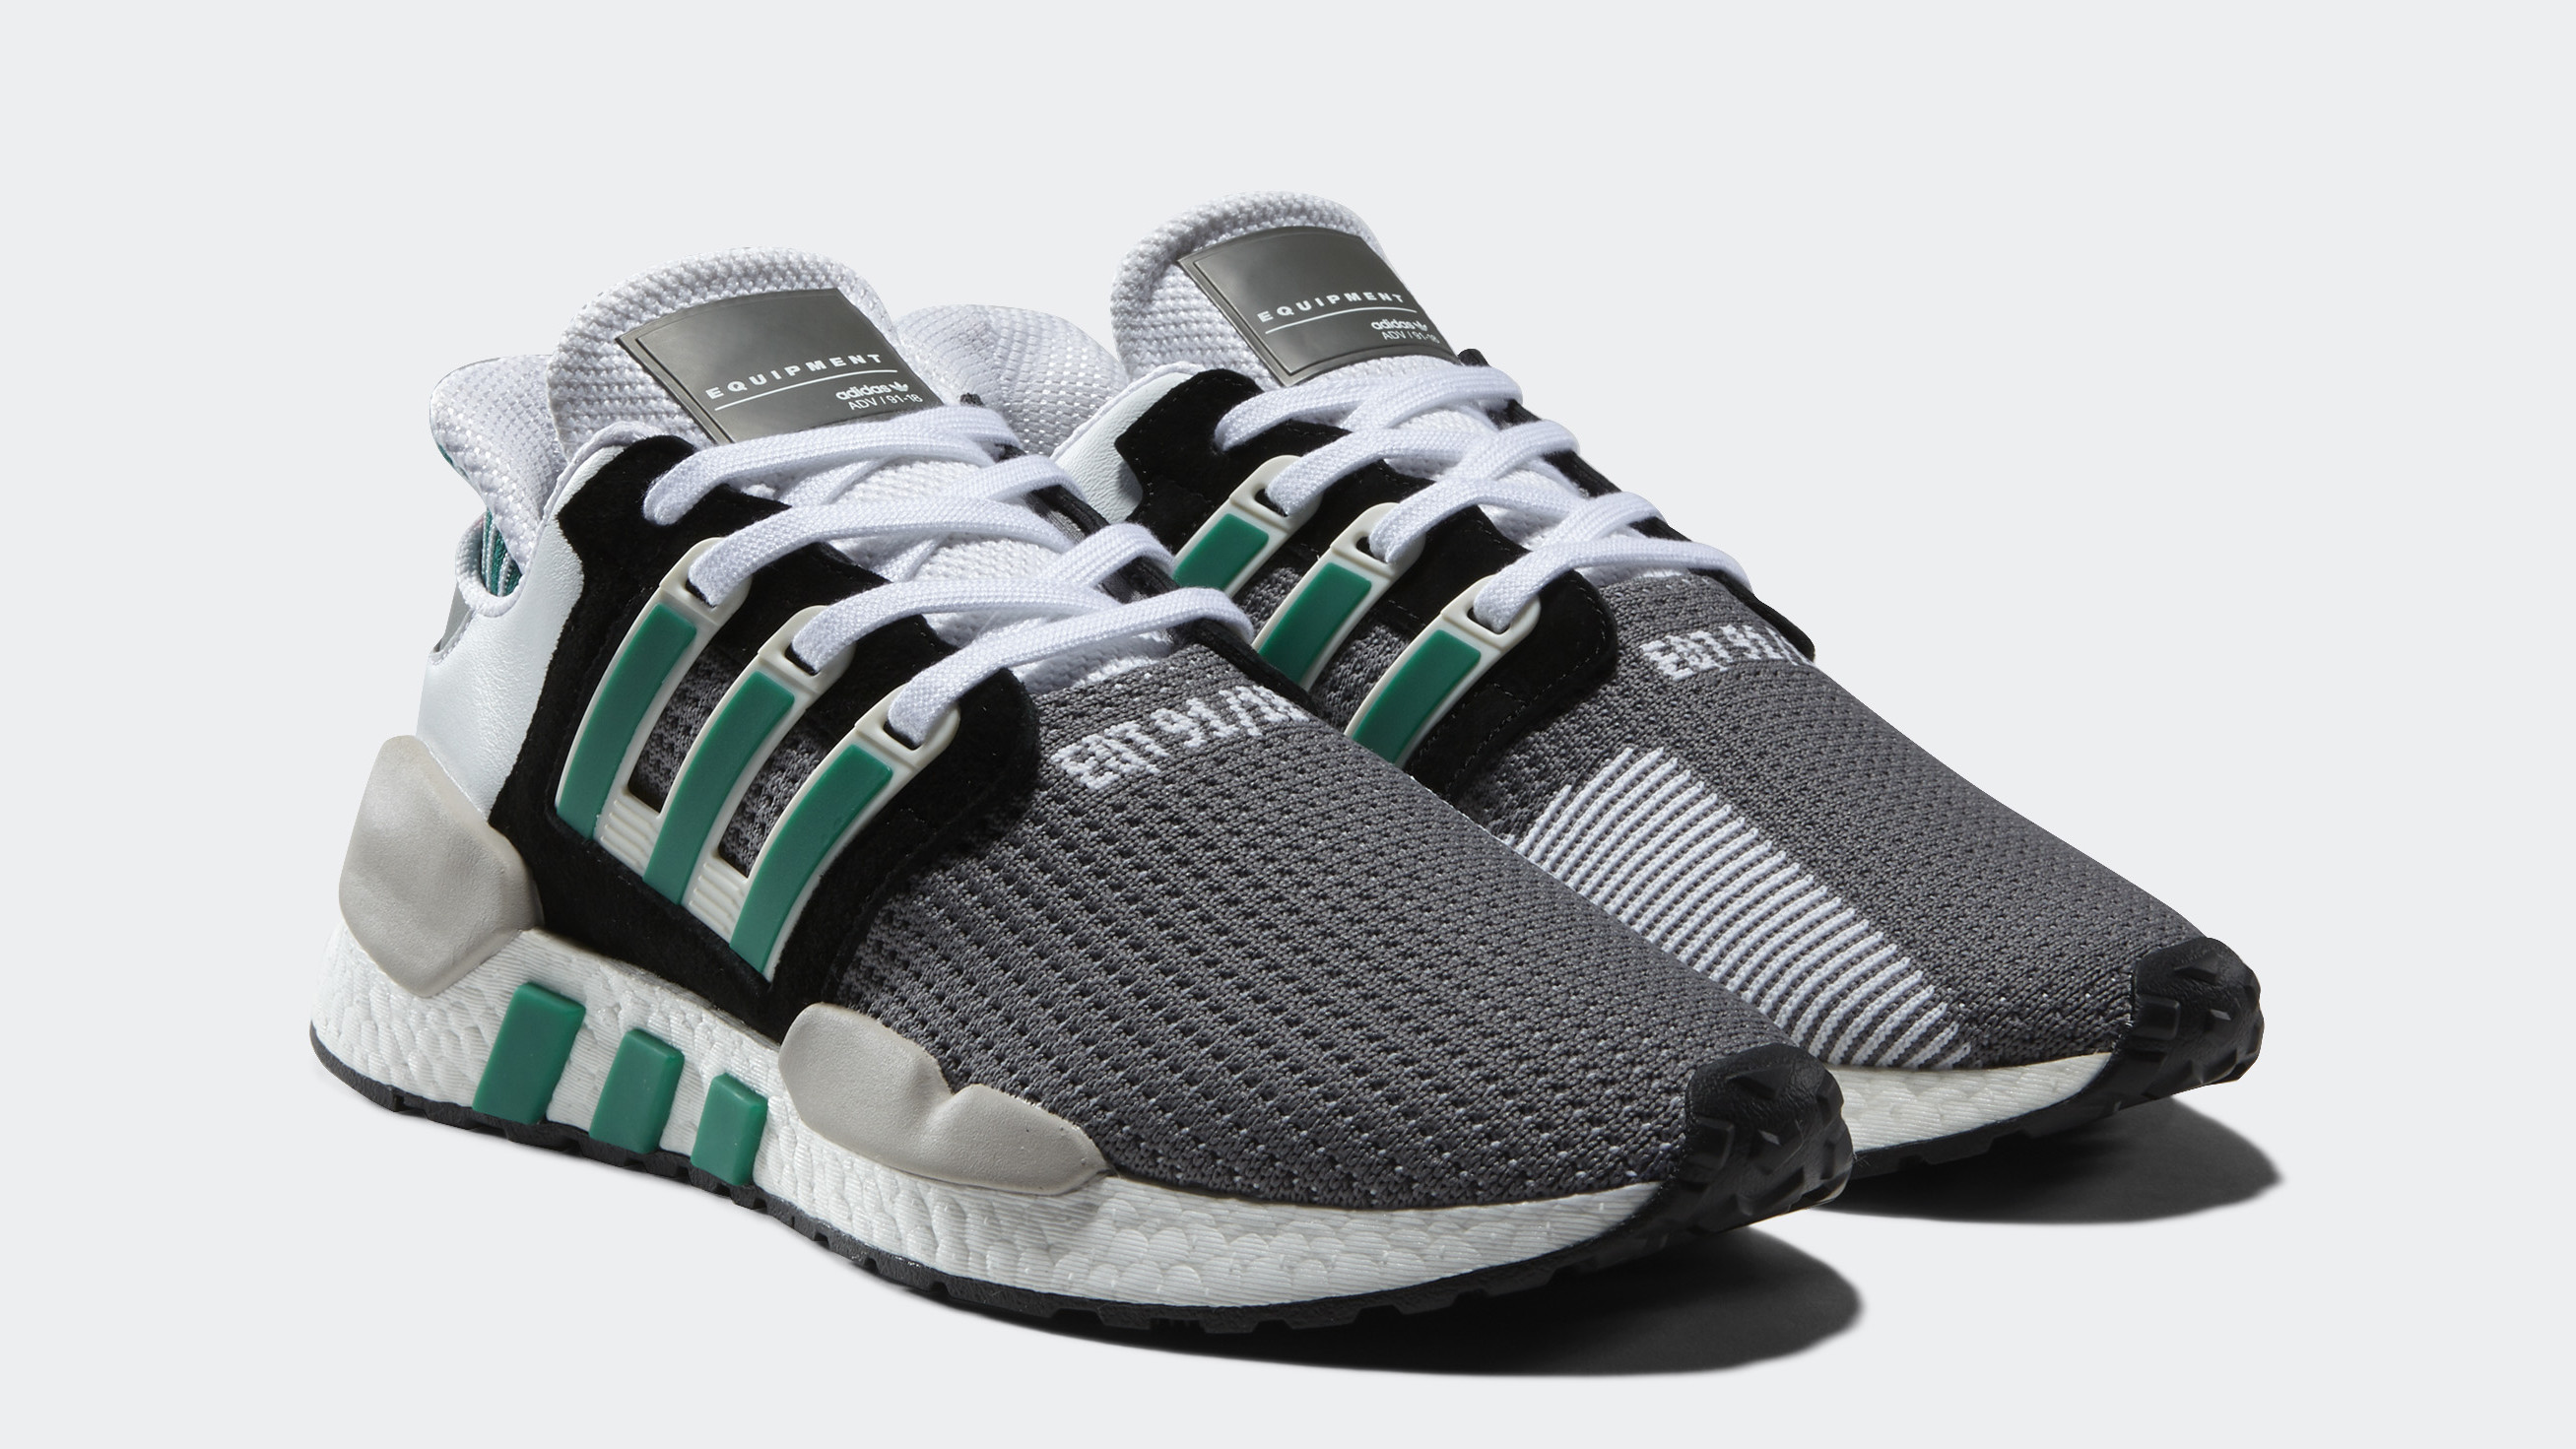 Decano rock asignar Adidas is Set to Release New EQT Support Silhouette | Sole Collector